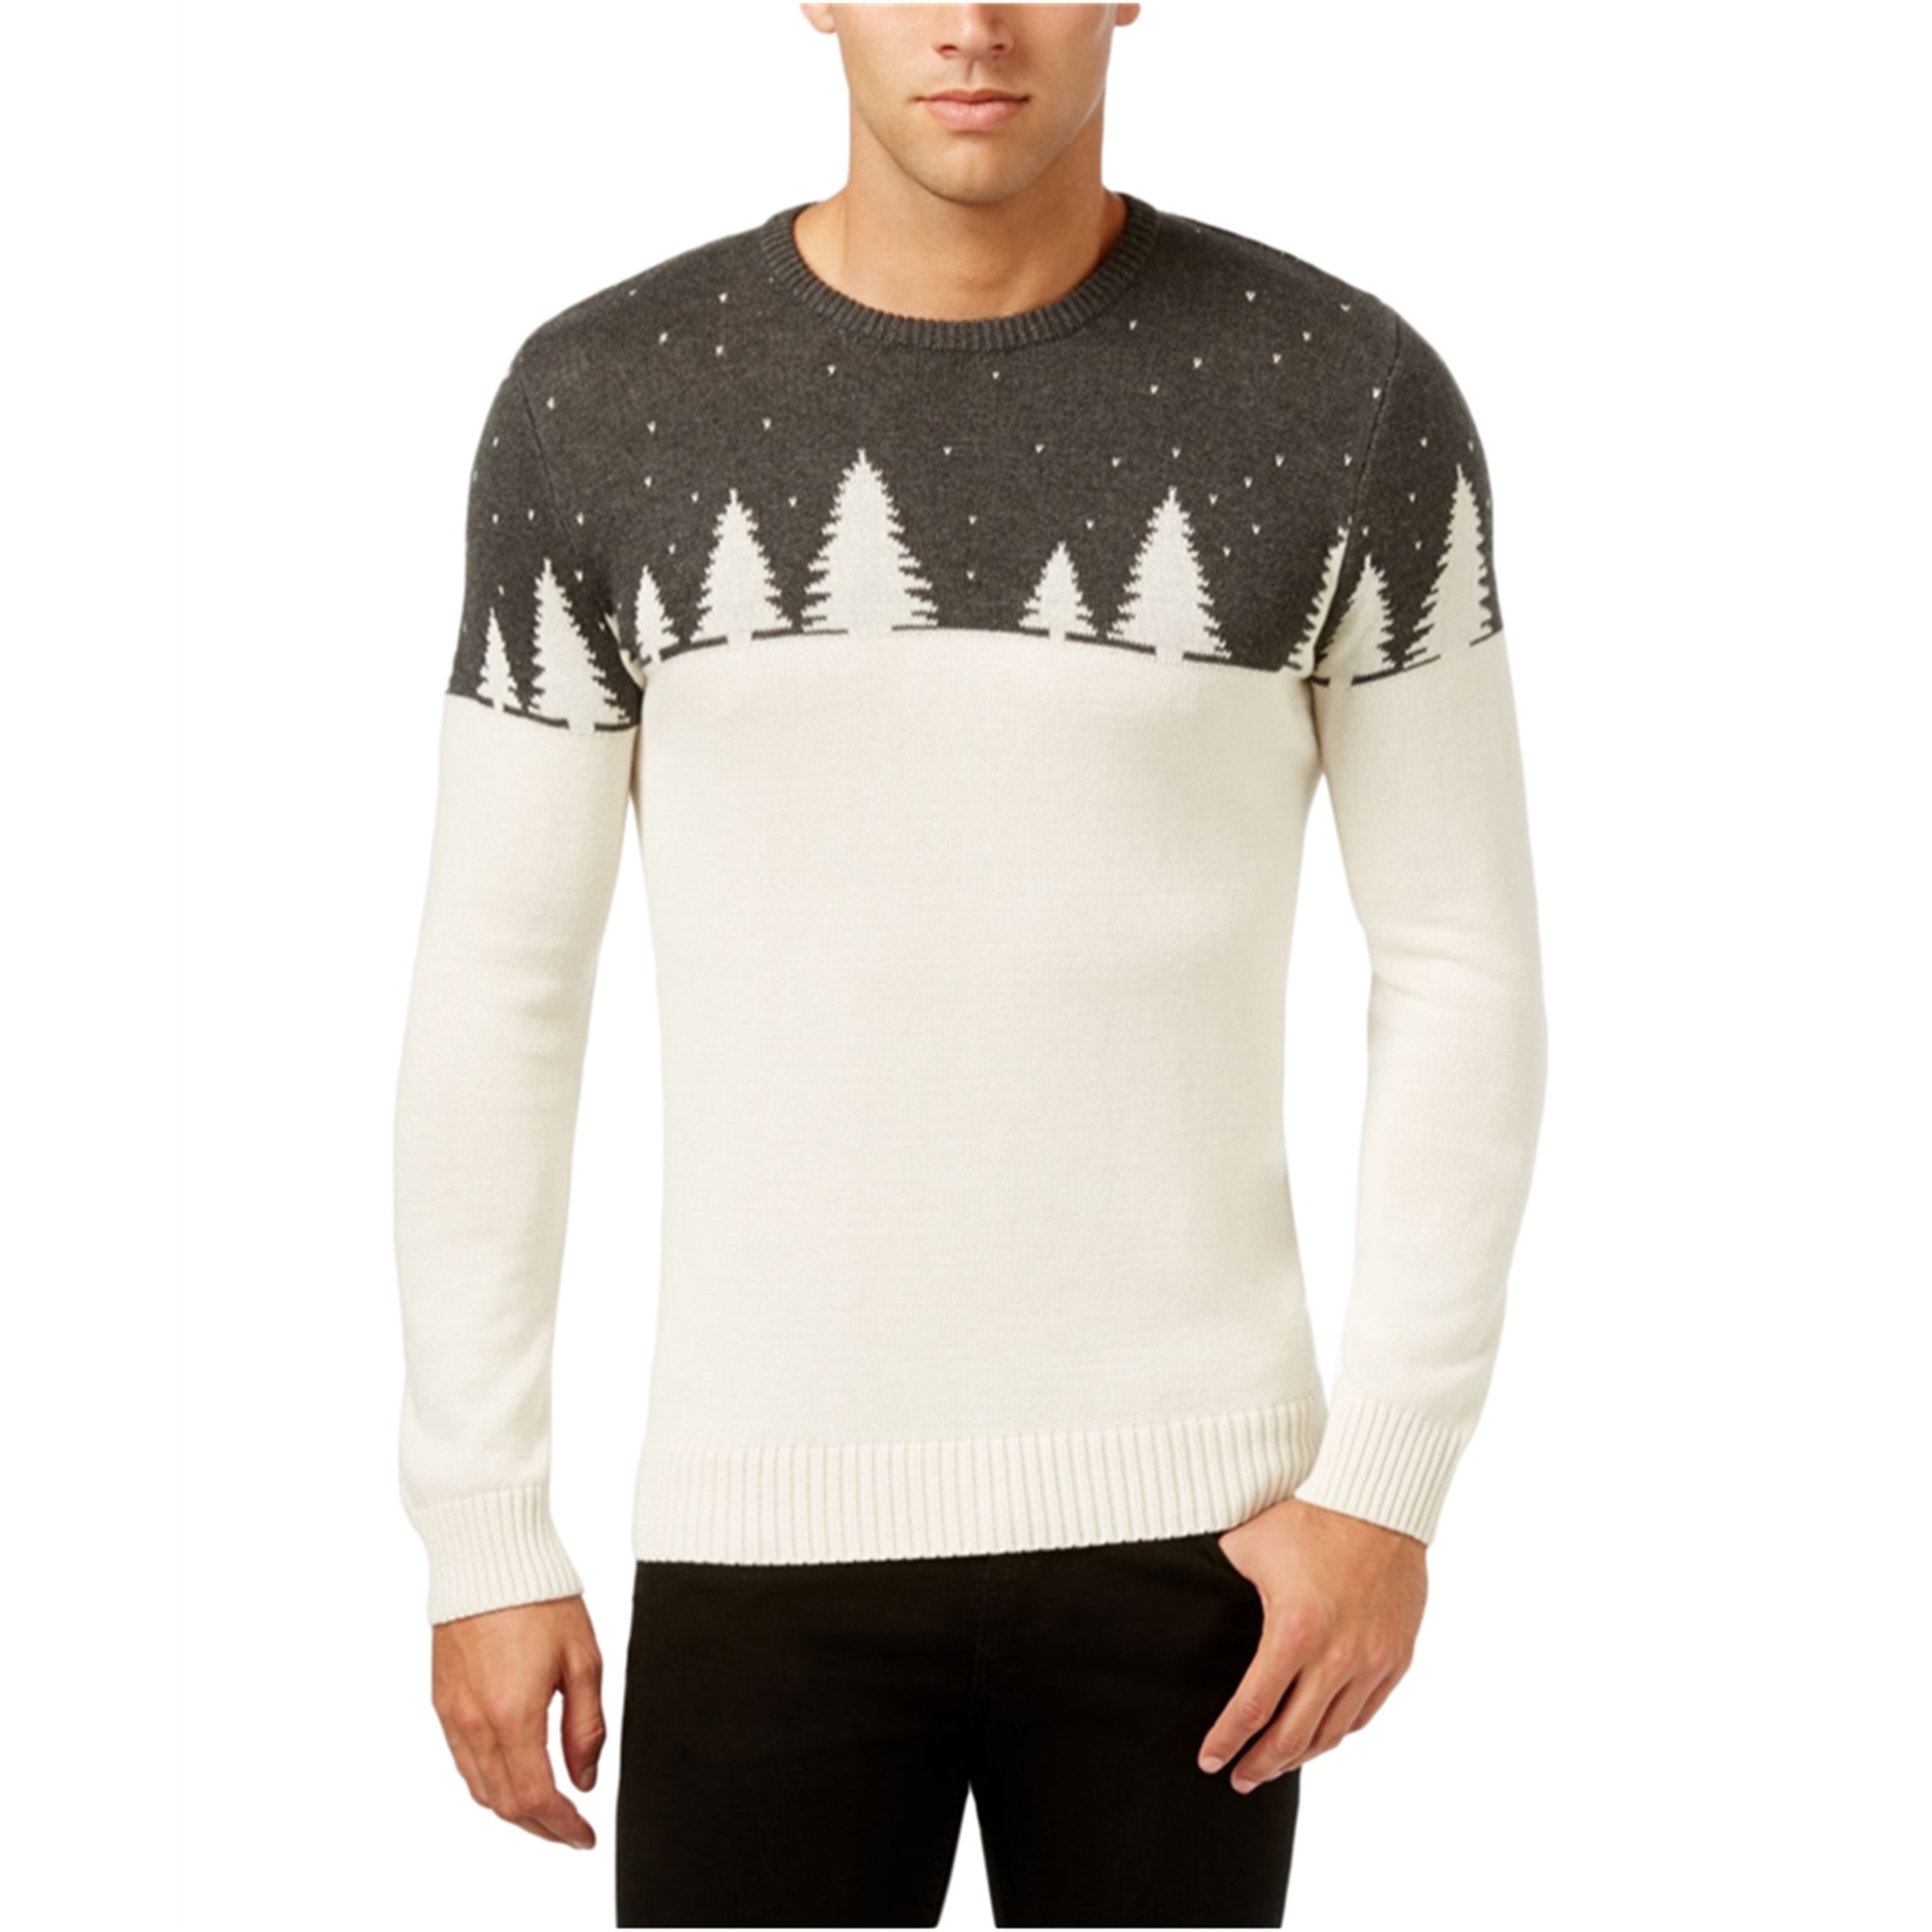 Holiday Arcade Mens Knit Colorblocked Pullover Sweater, Grey, XX-Large - image 1 of 2